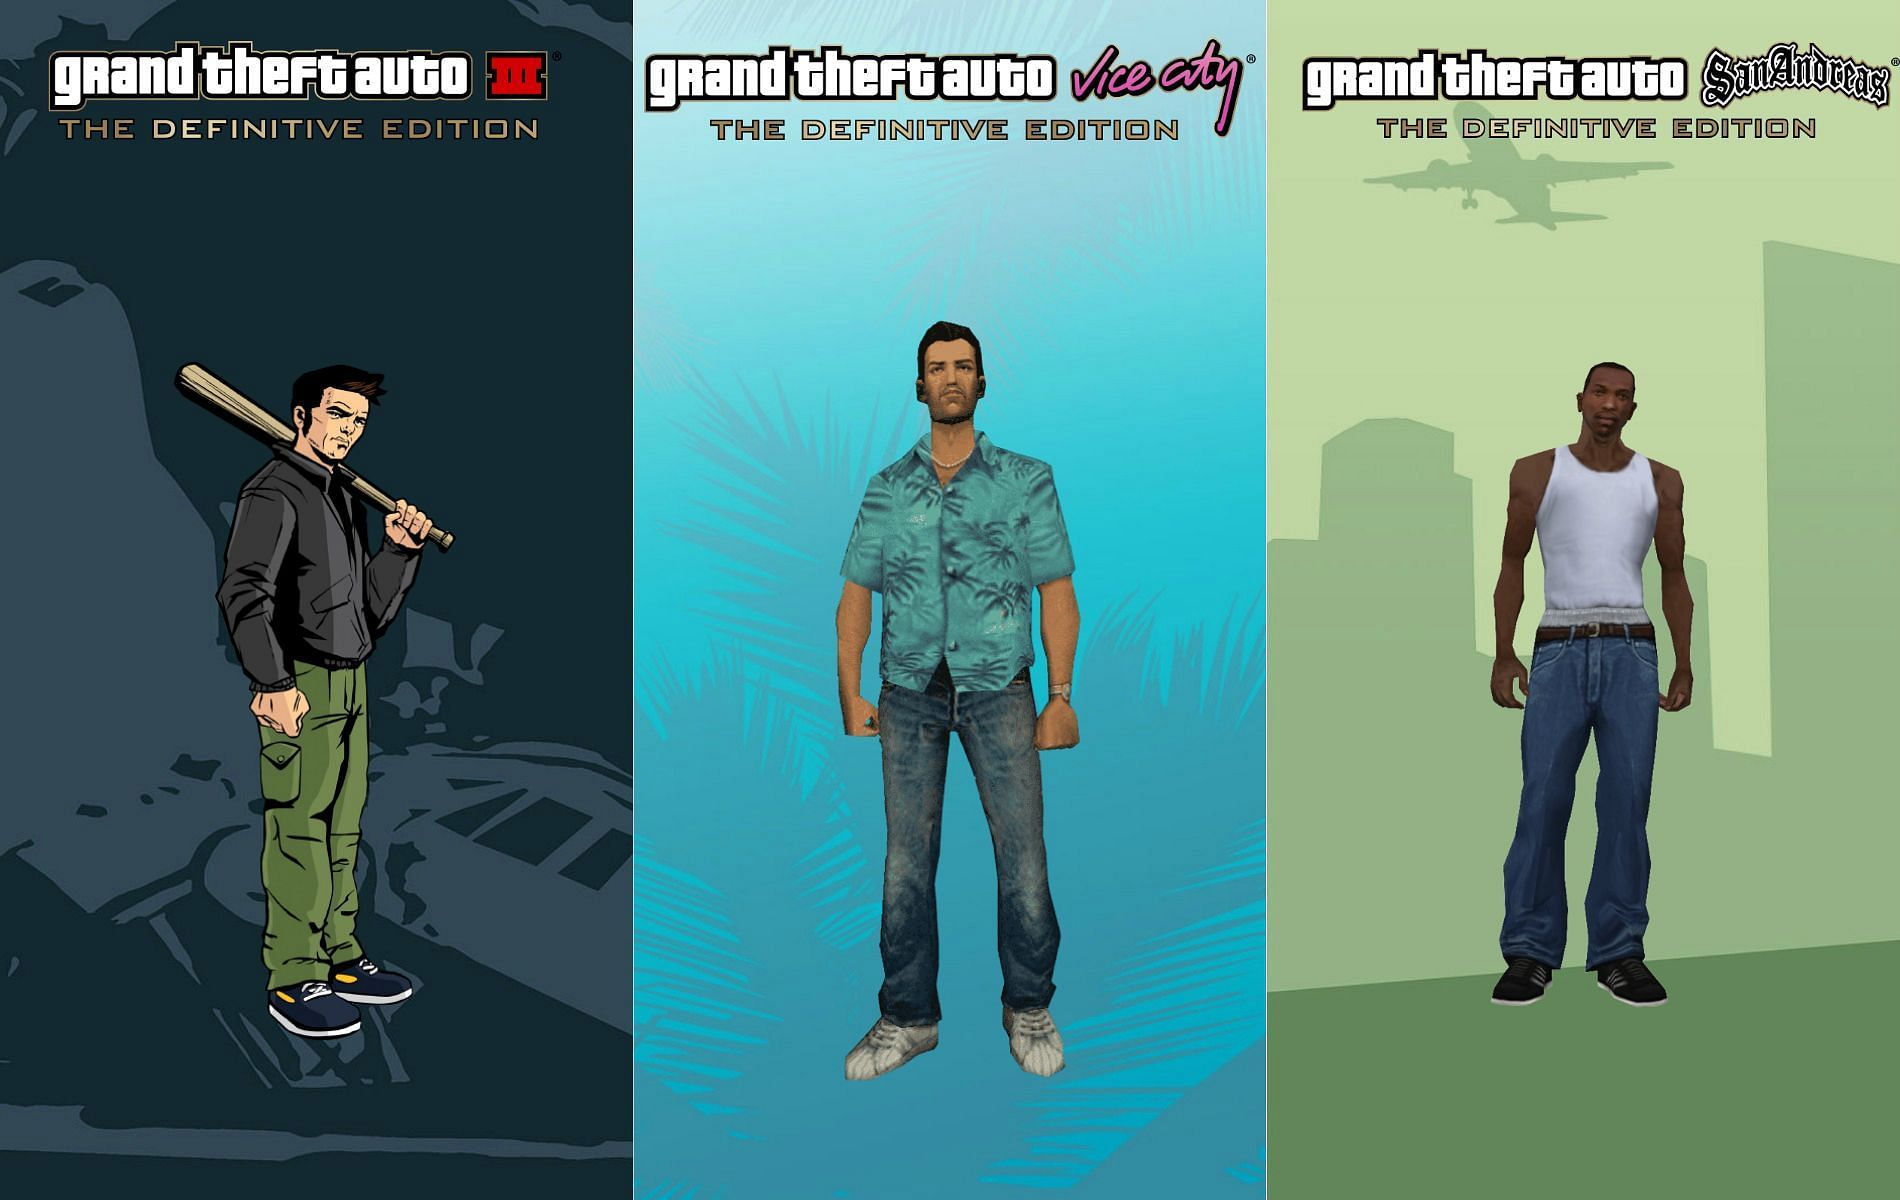 The trilogy gta What Order